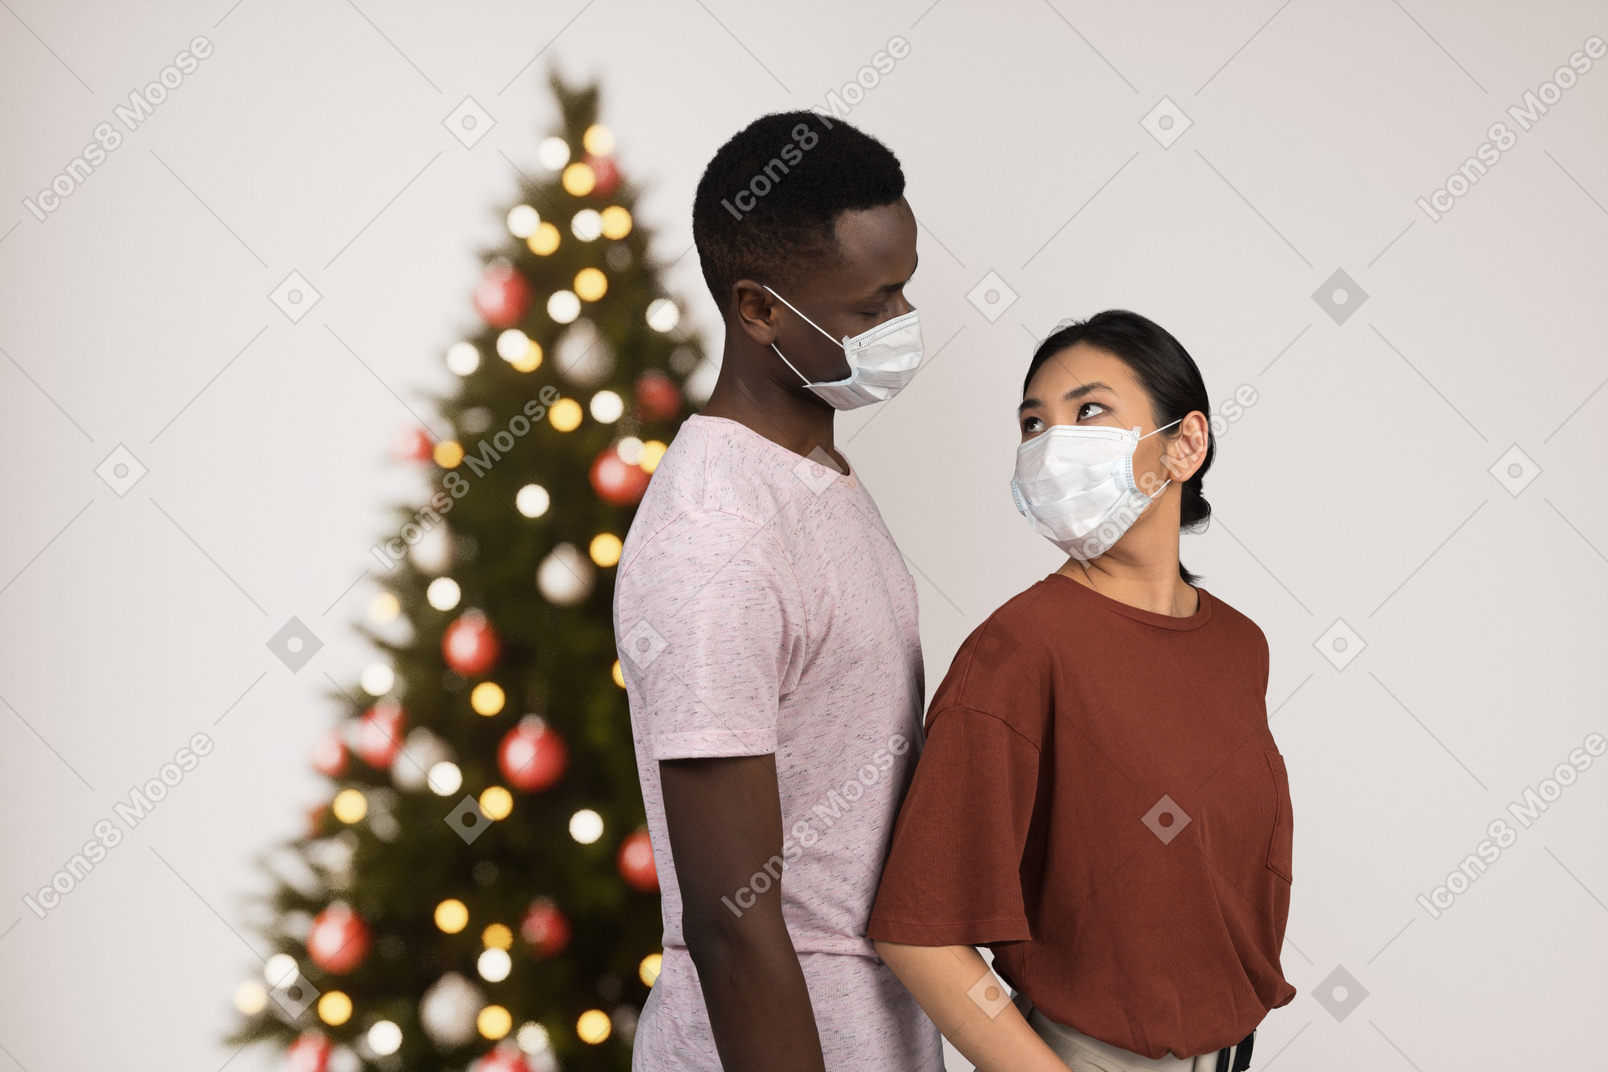 Young couple wearing masks are ready for christmas